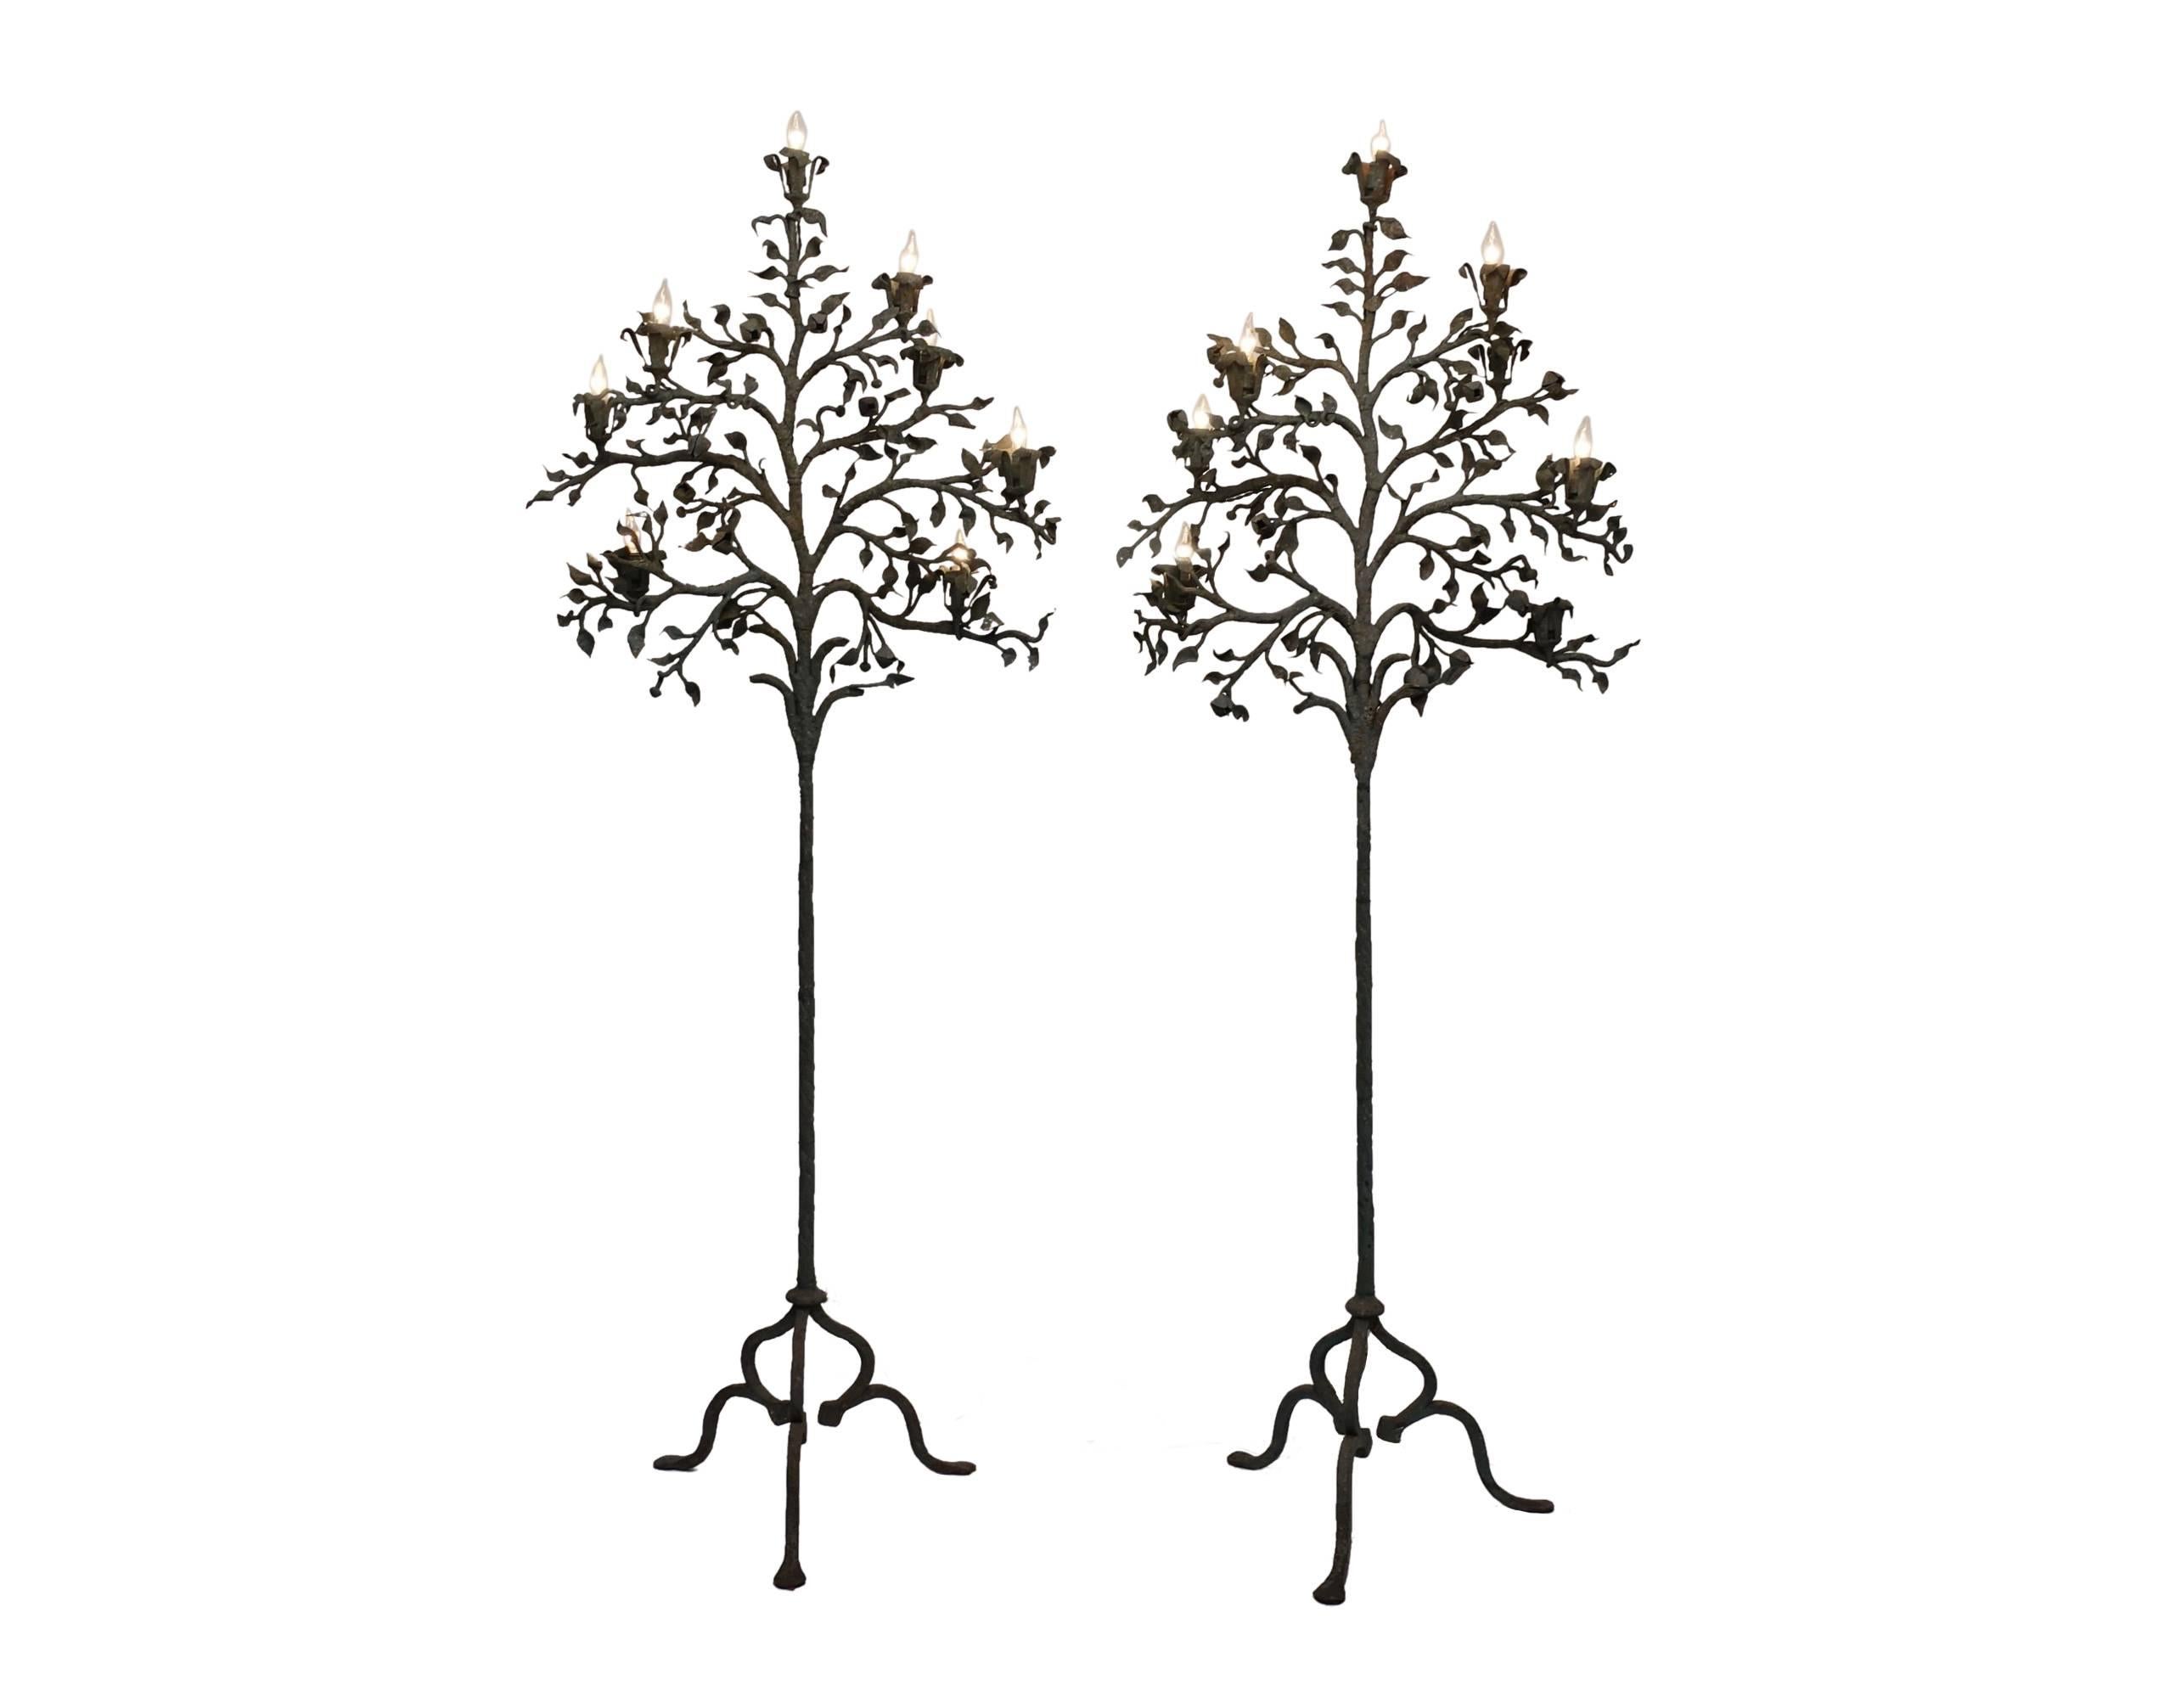 Pair of Wrought Iron Tree Form Torchiere Floor Lamps, Italy, 19th Century 6